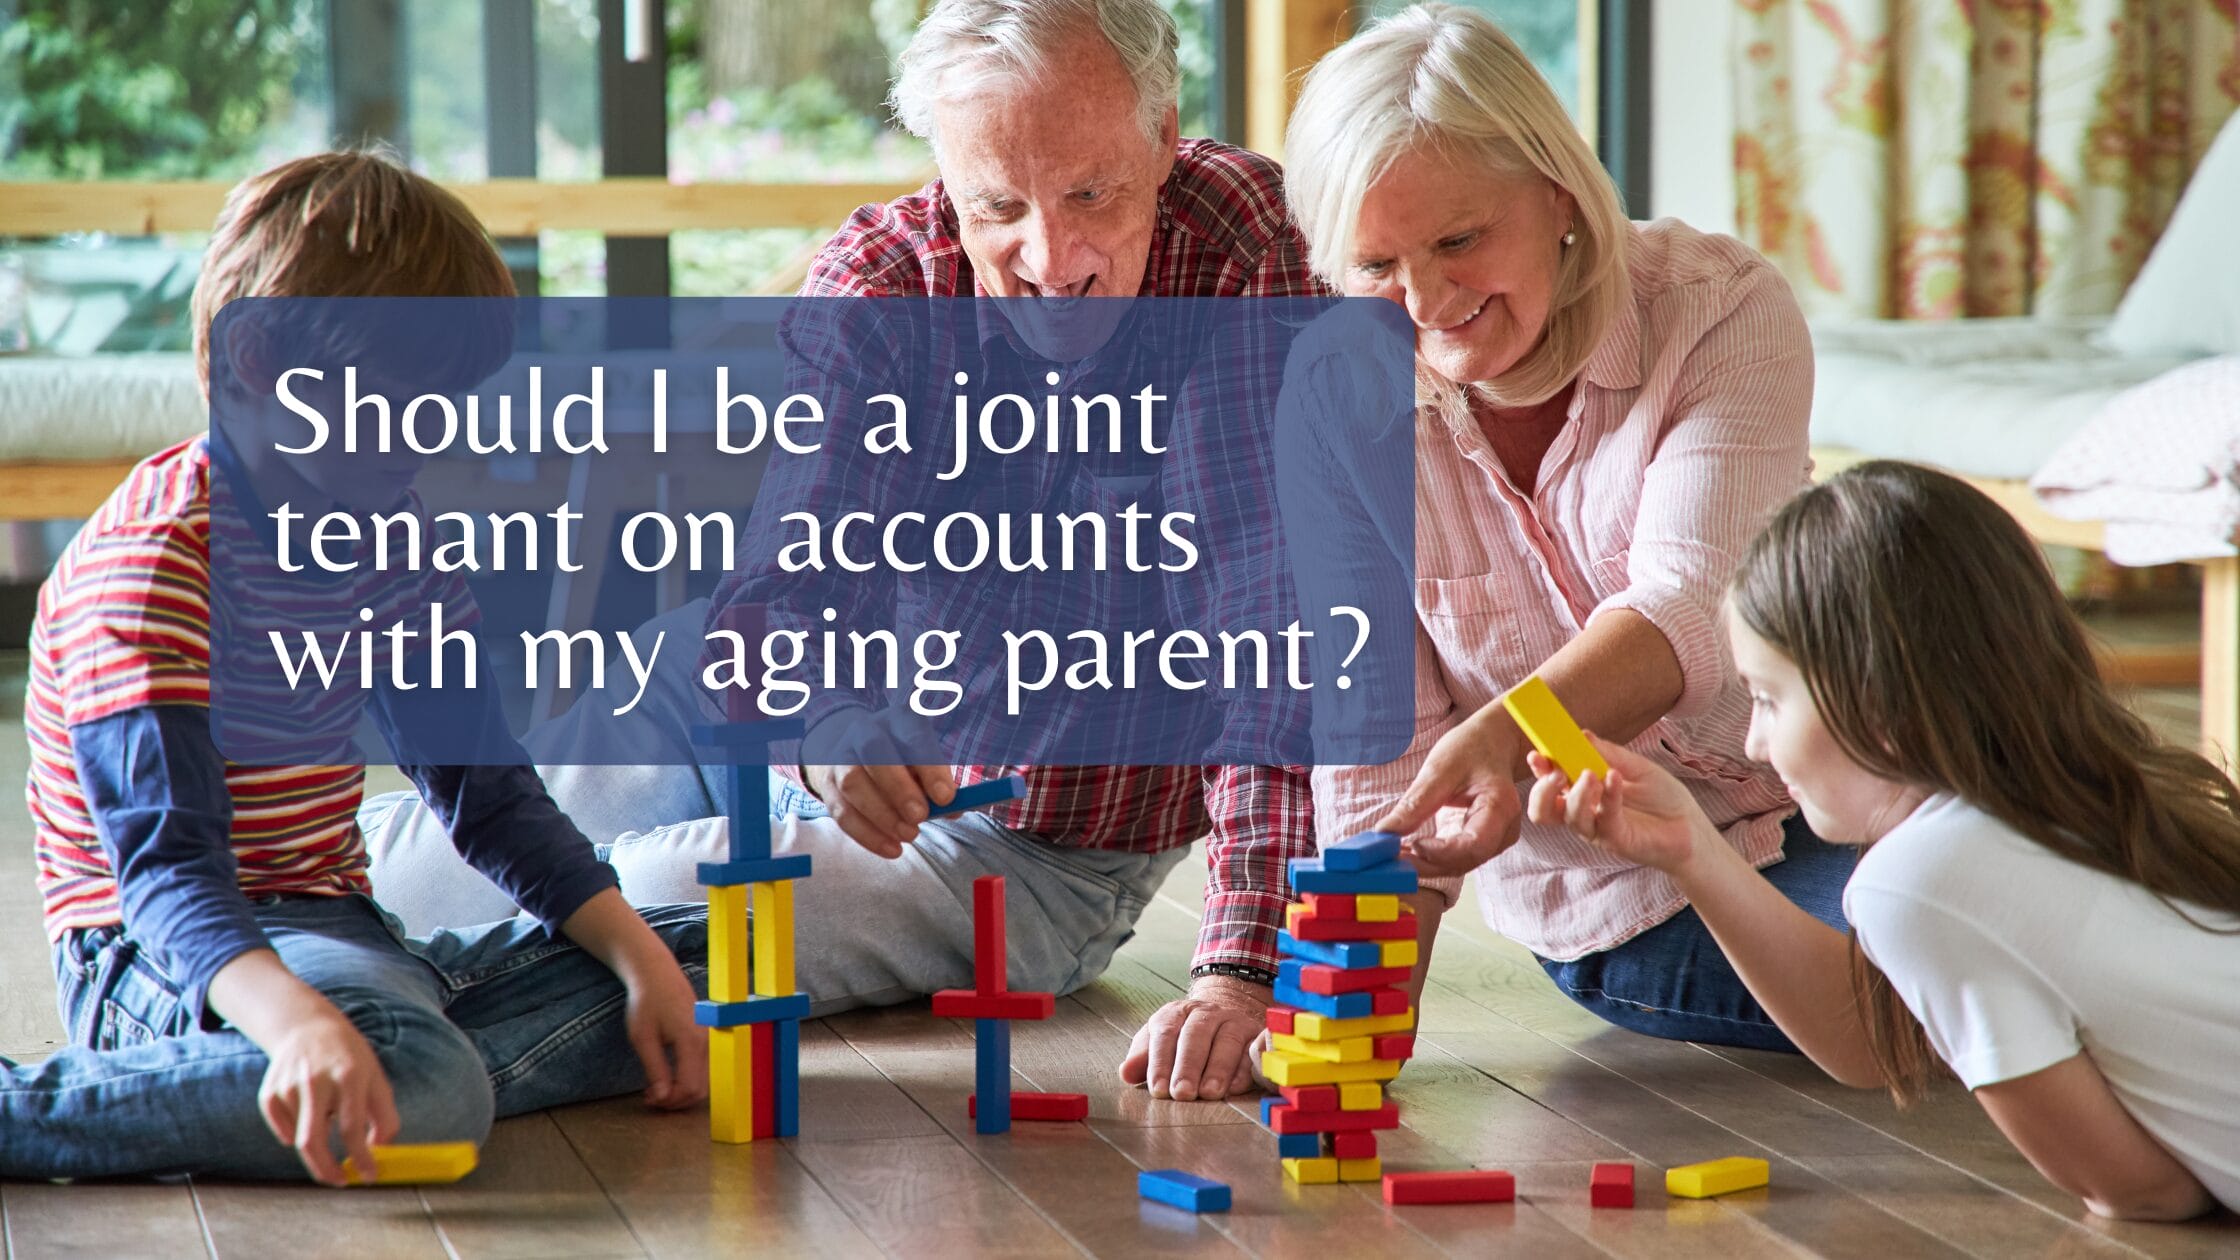 Should I be a joint tenant on accounts with my aging parent?